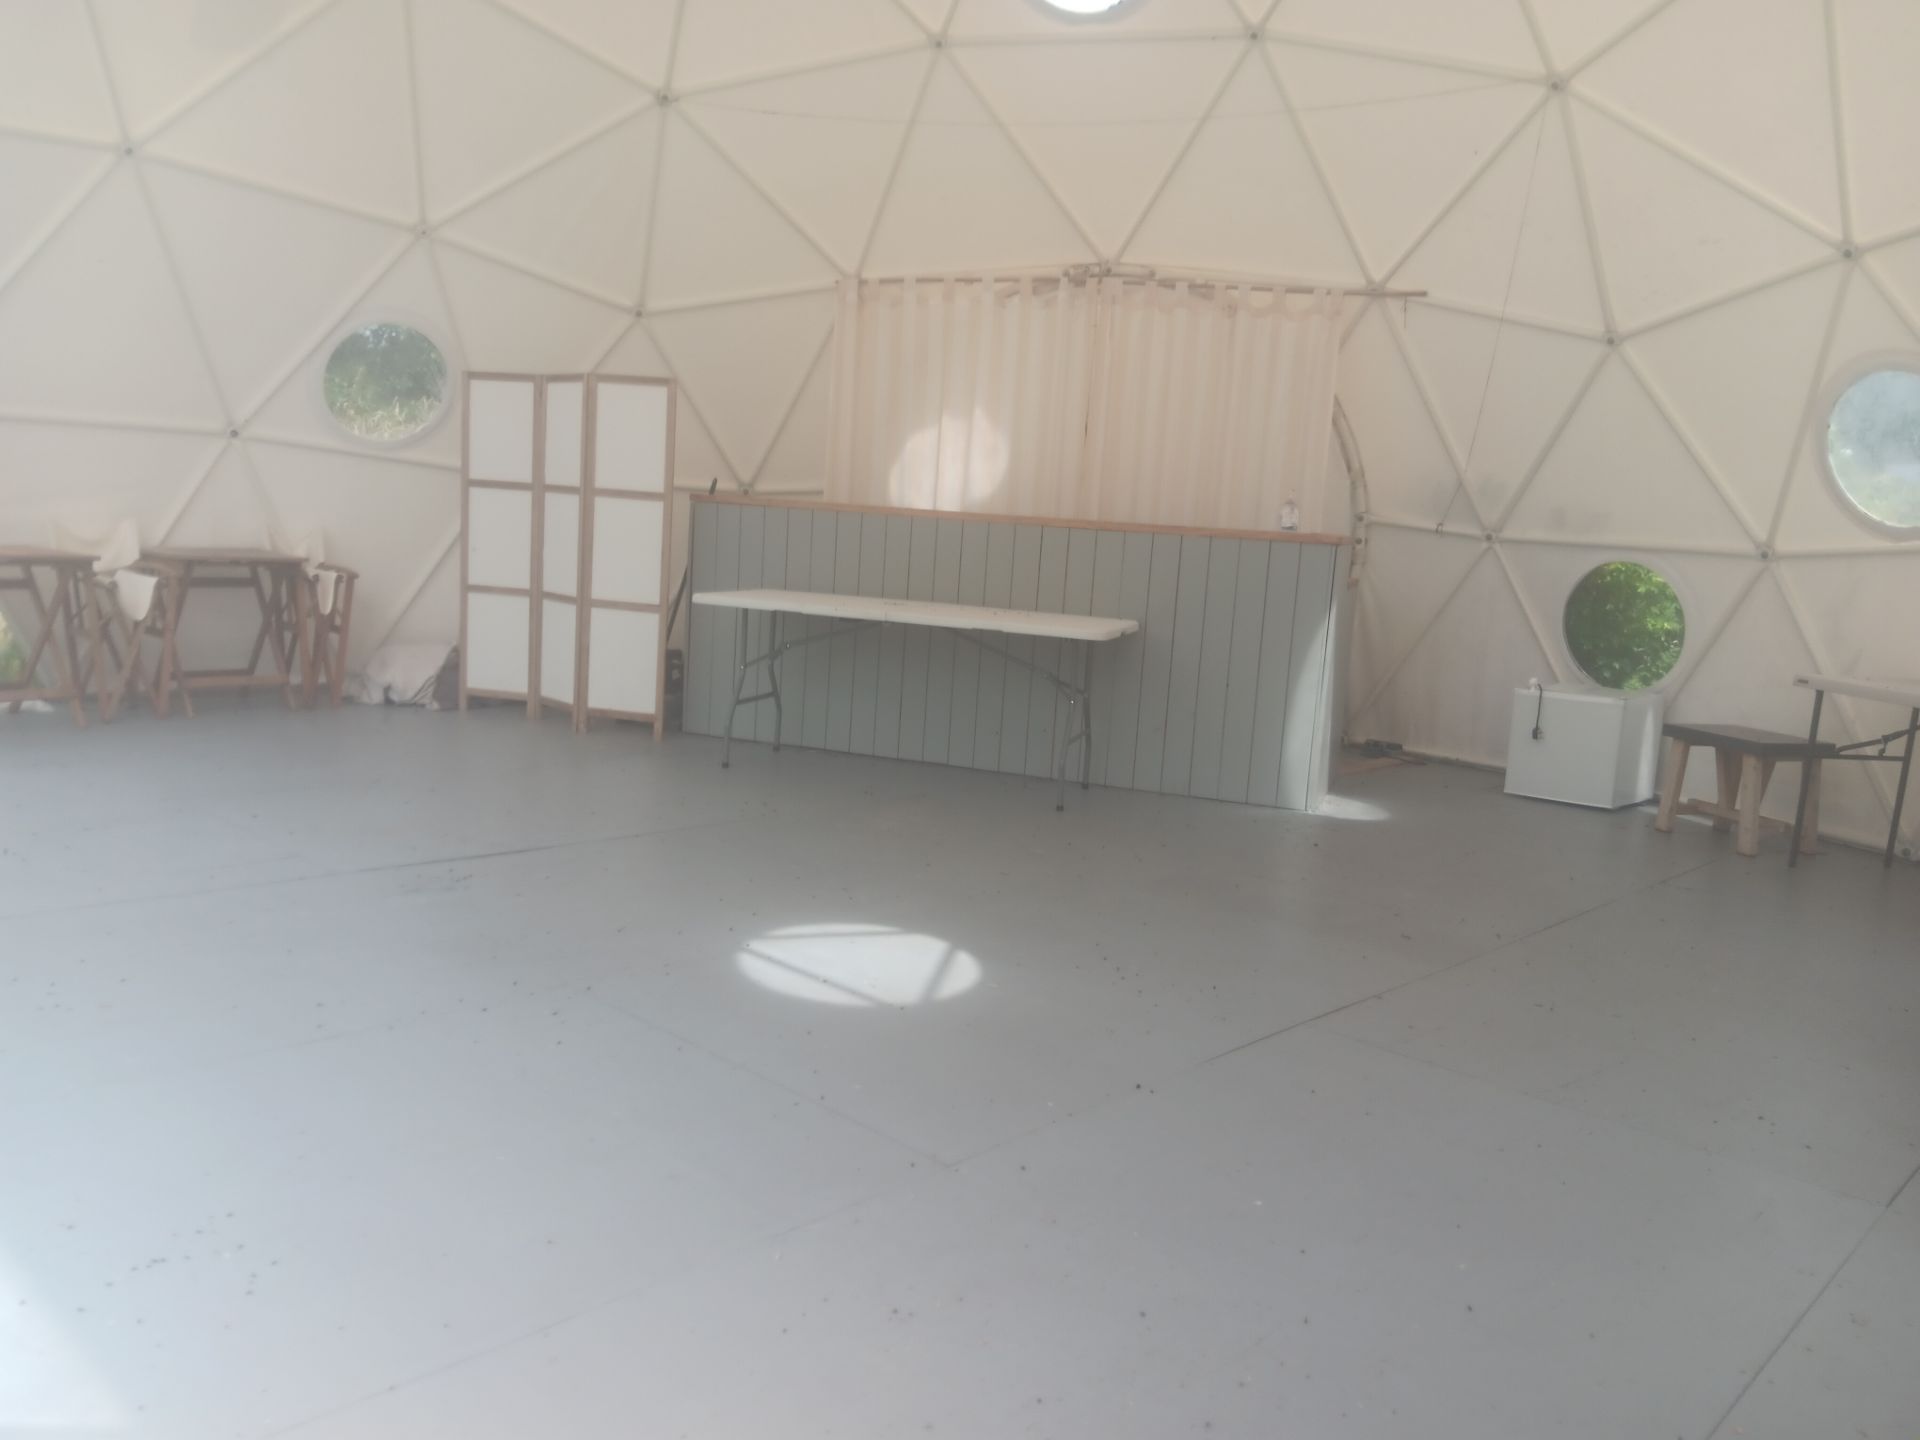 Pacific Domes 9m geodesic dome tent with furniture Viewing strongly recommended to establish - Image 5 of 6